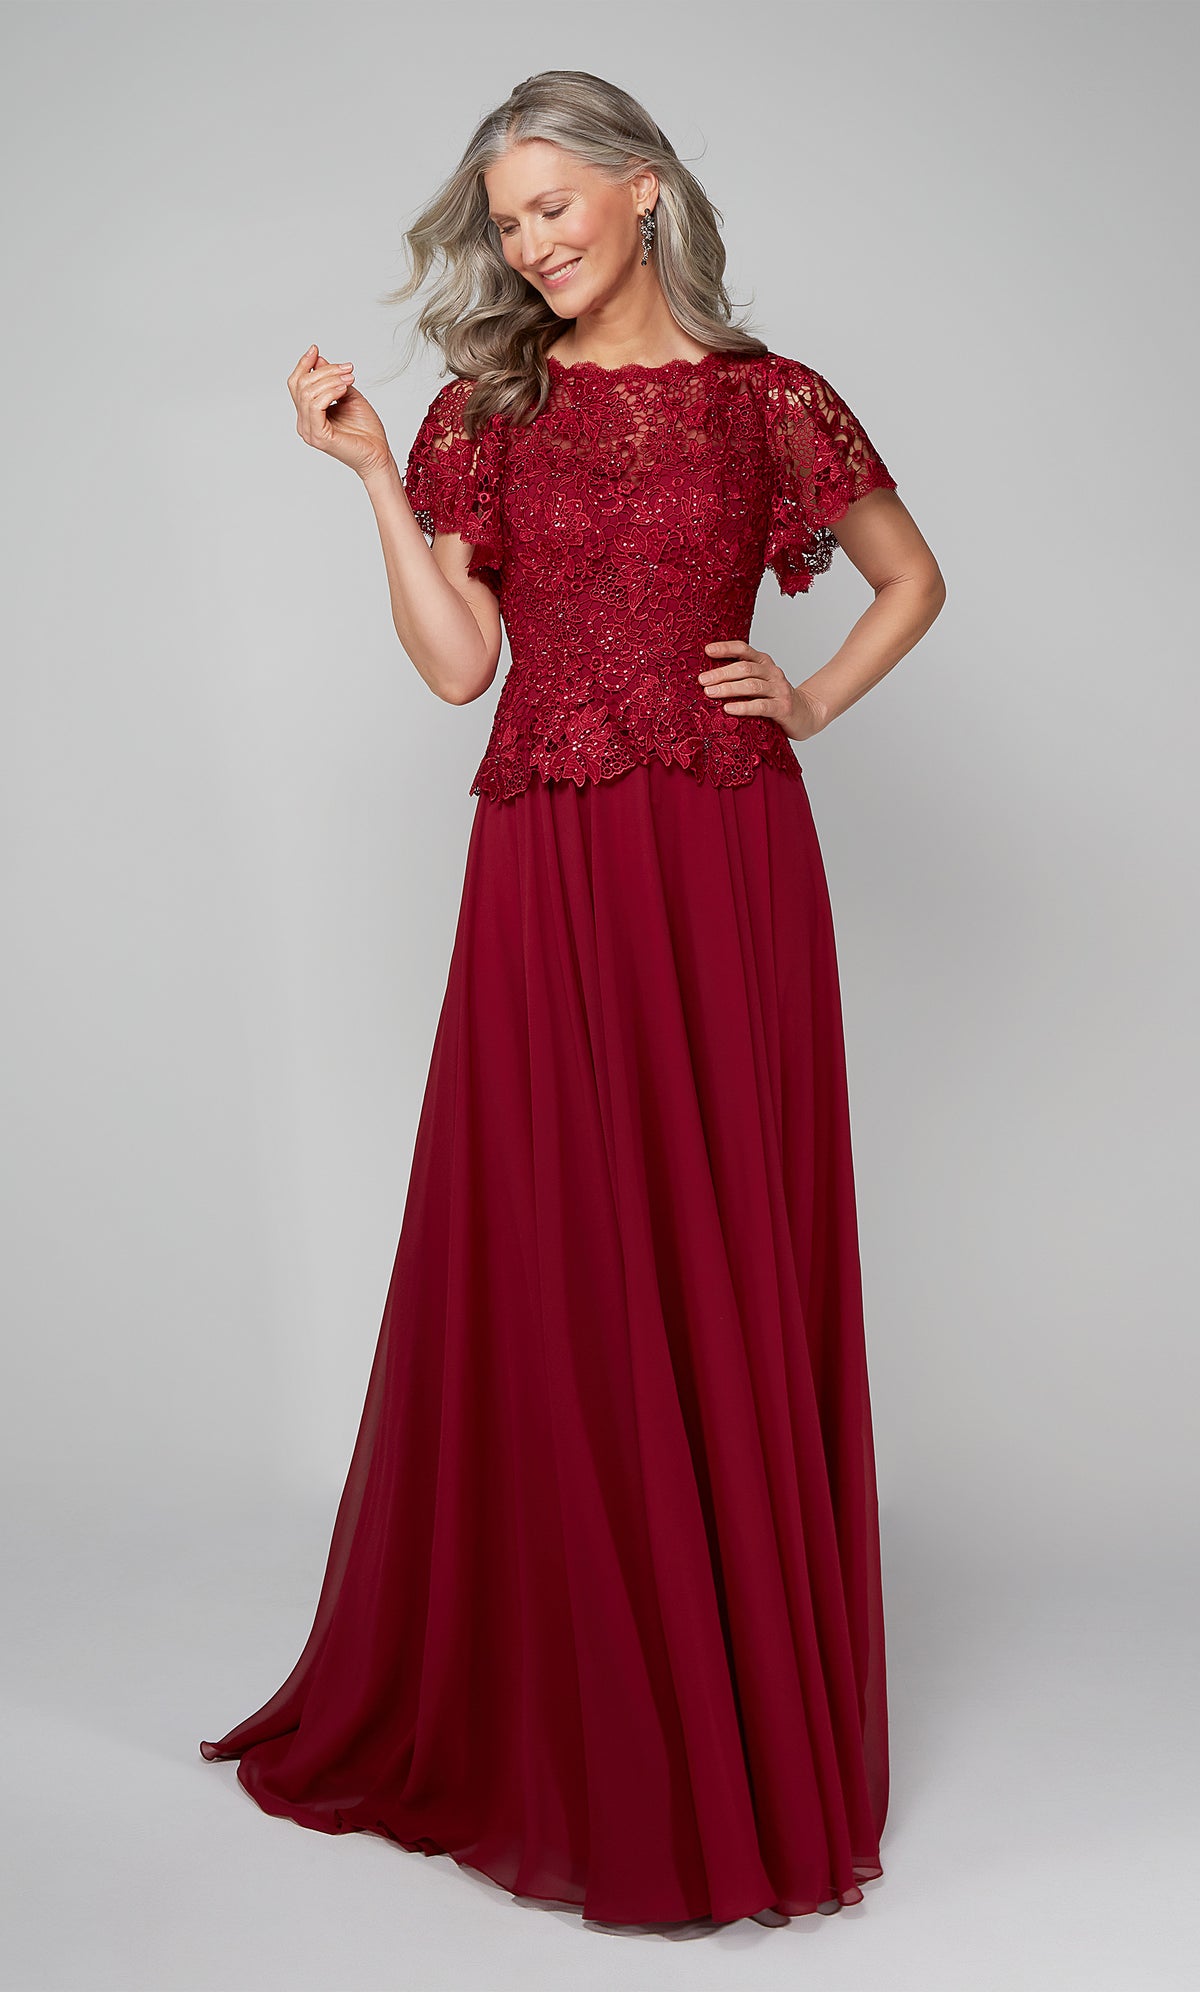 Long formal dress with lace peplum top with butterfly sleeves and a flowy chiffon skirt in wine red. COLOR-SWATCH_27469_WINE